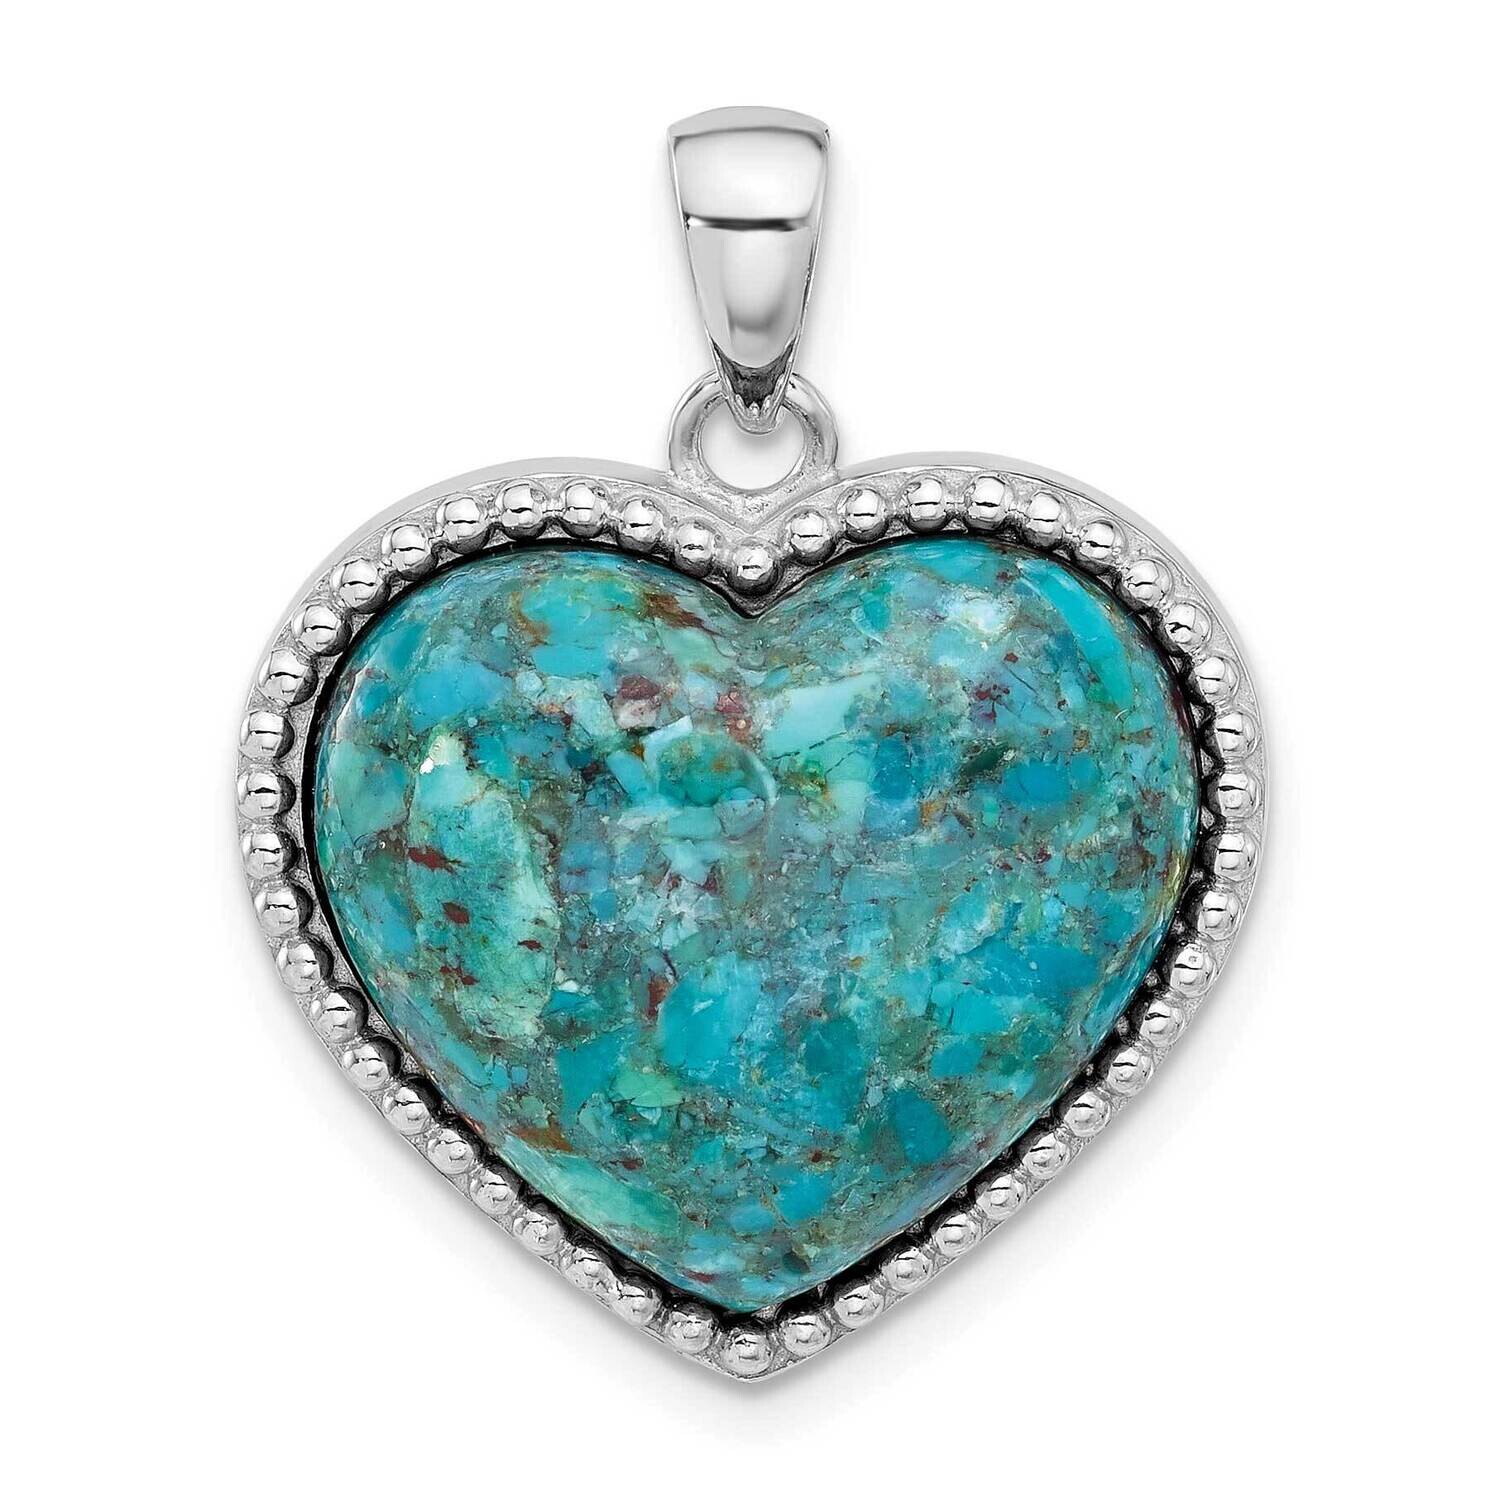 Reconstituted Turquoise Heart Pendant Sterling Silver Rhodium-Plated QP5757